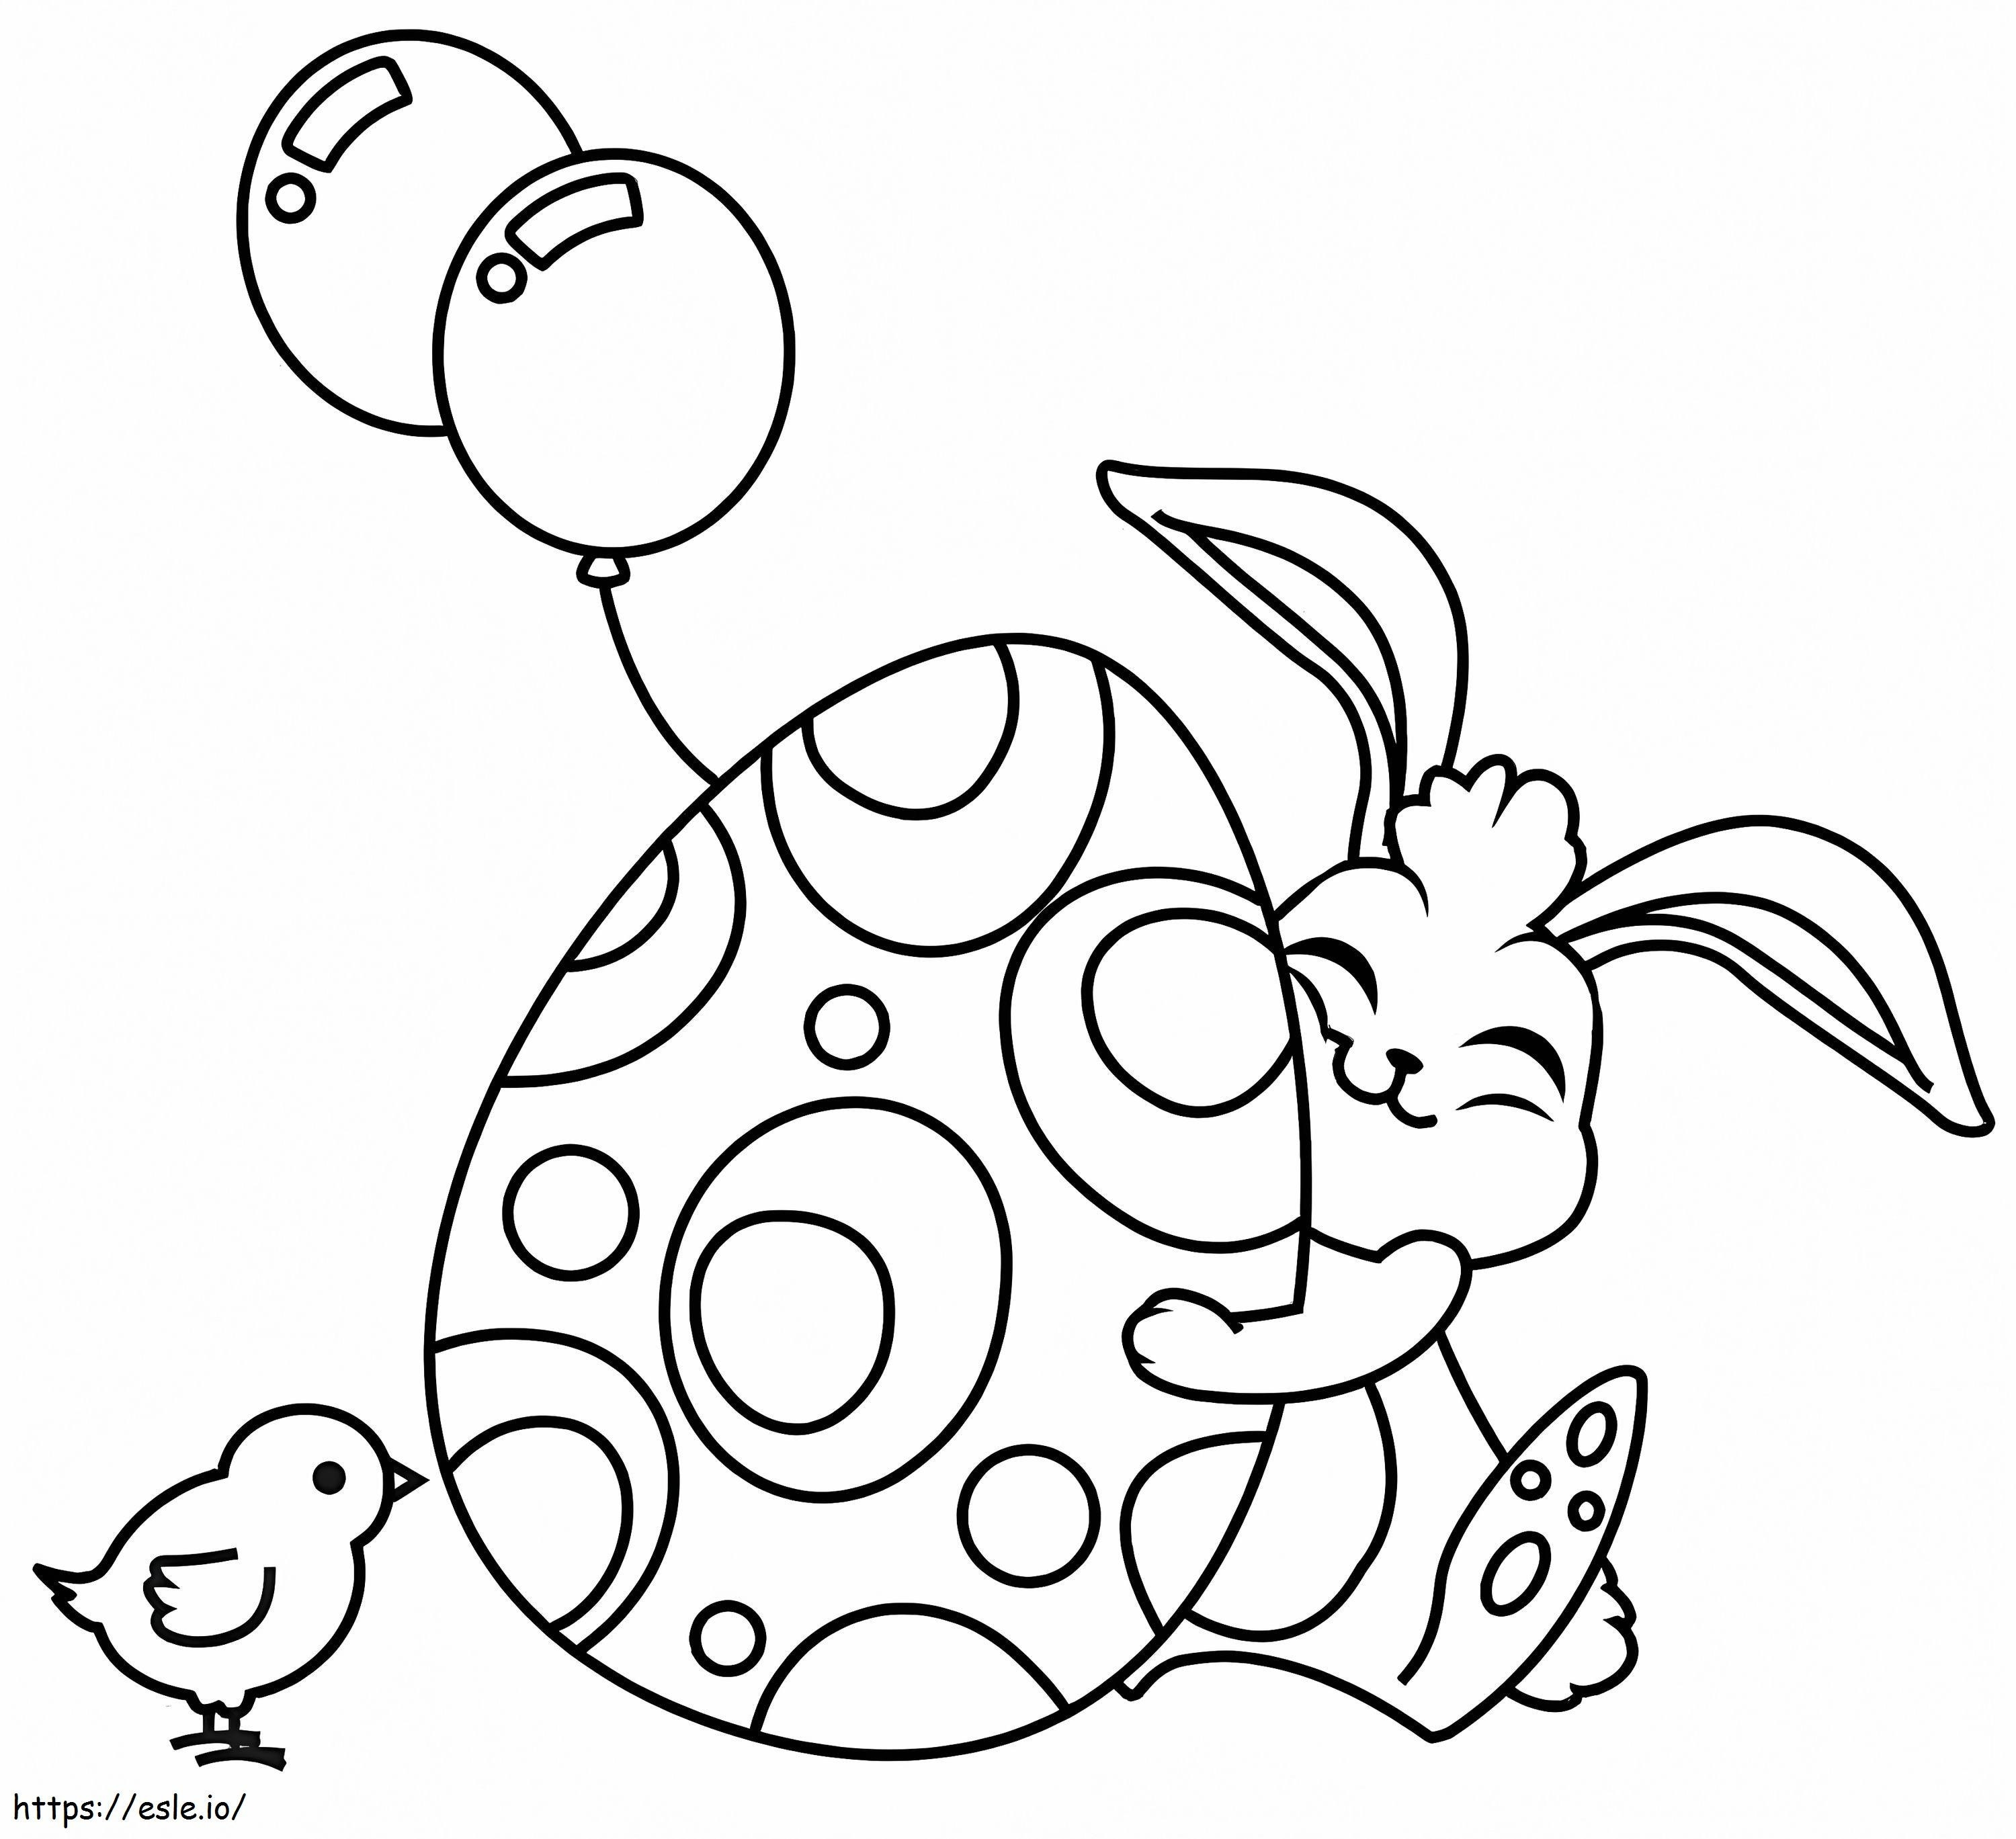 Happy Easter Rabbit coloring page